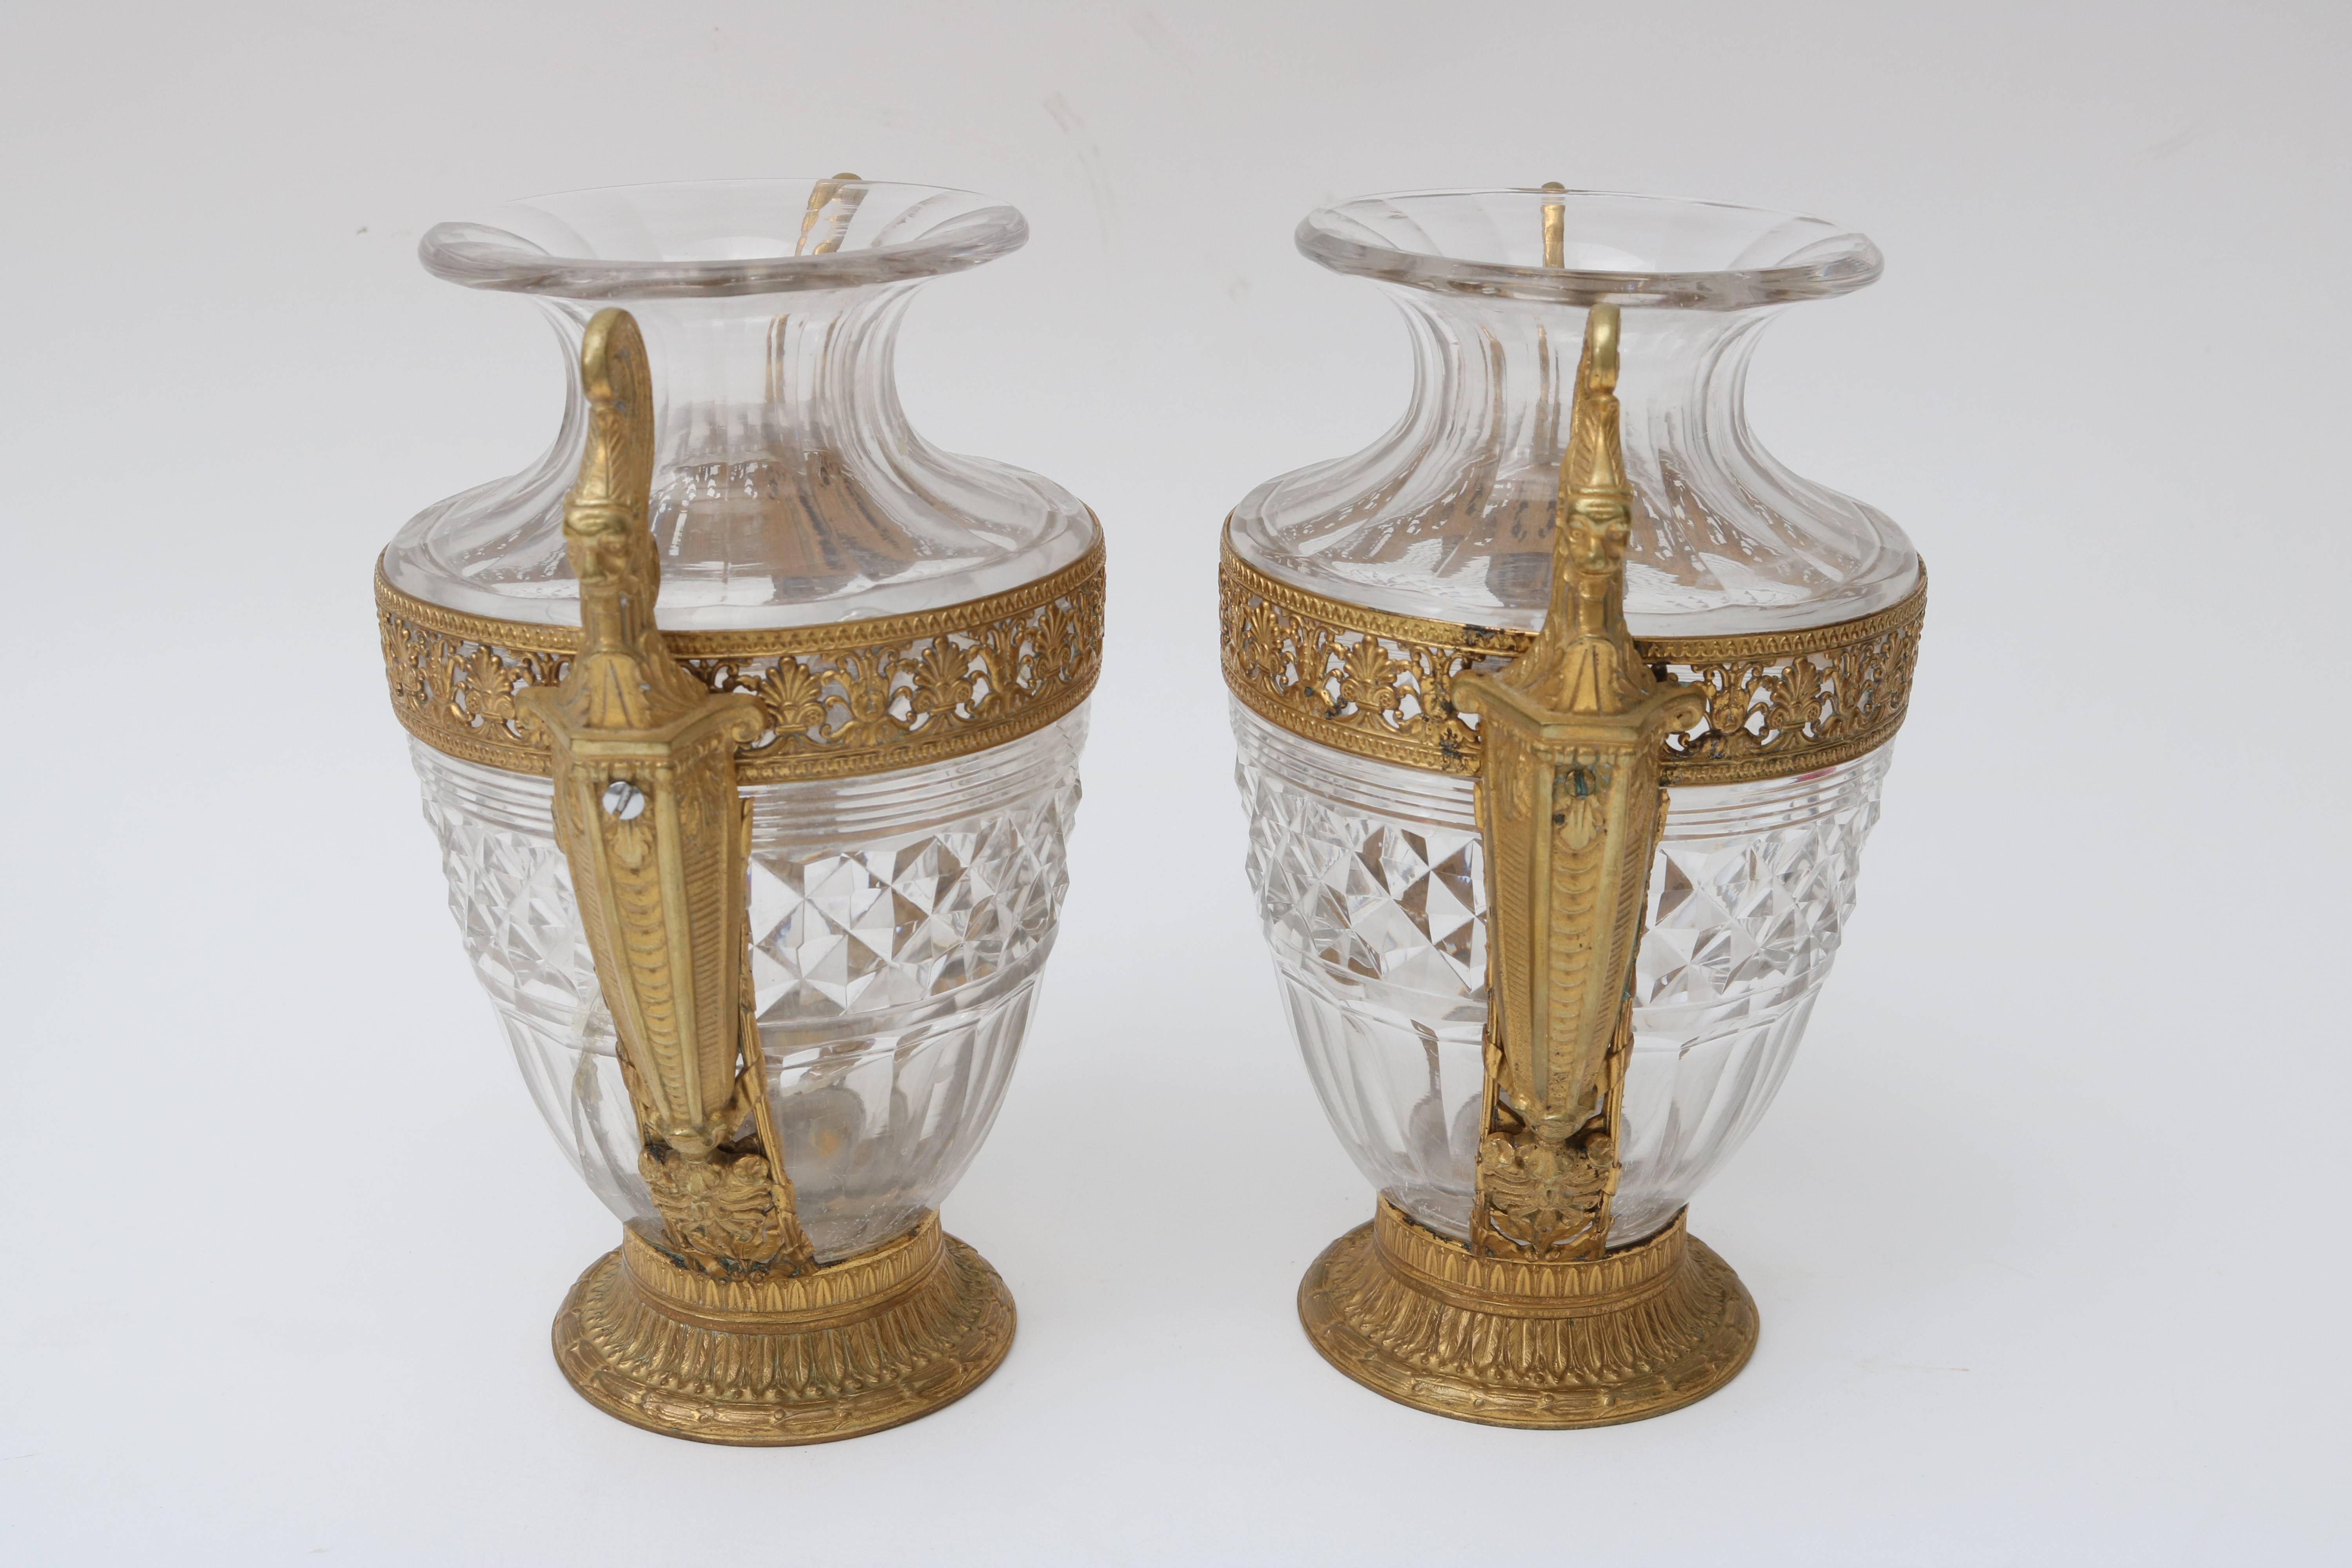  French Empire Style Bronze and Crystal Vases In Good Condition For Sale In West Palm Beach, FL